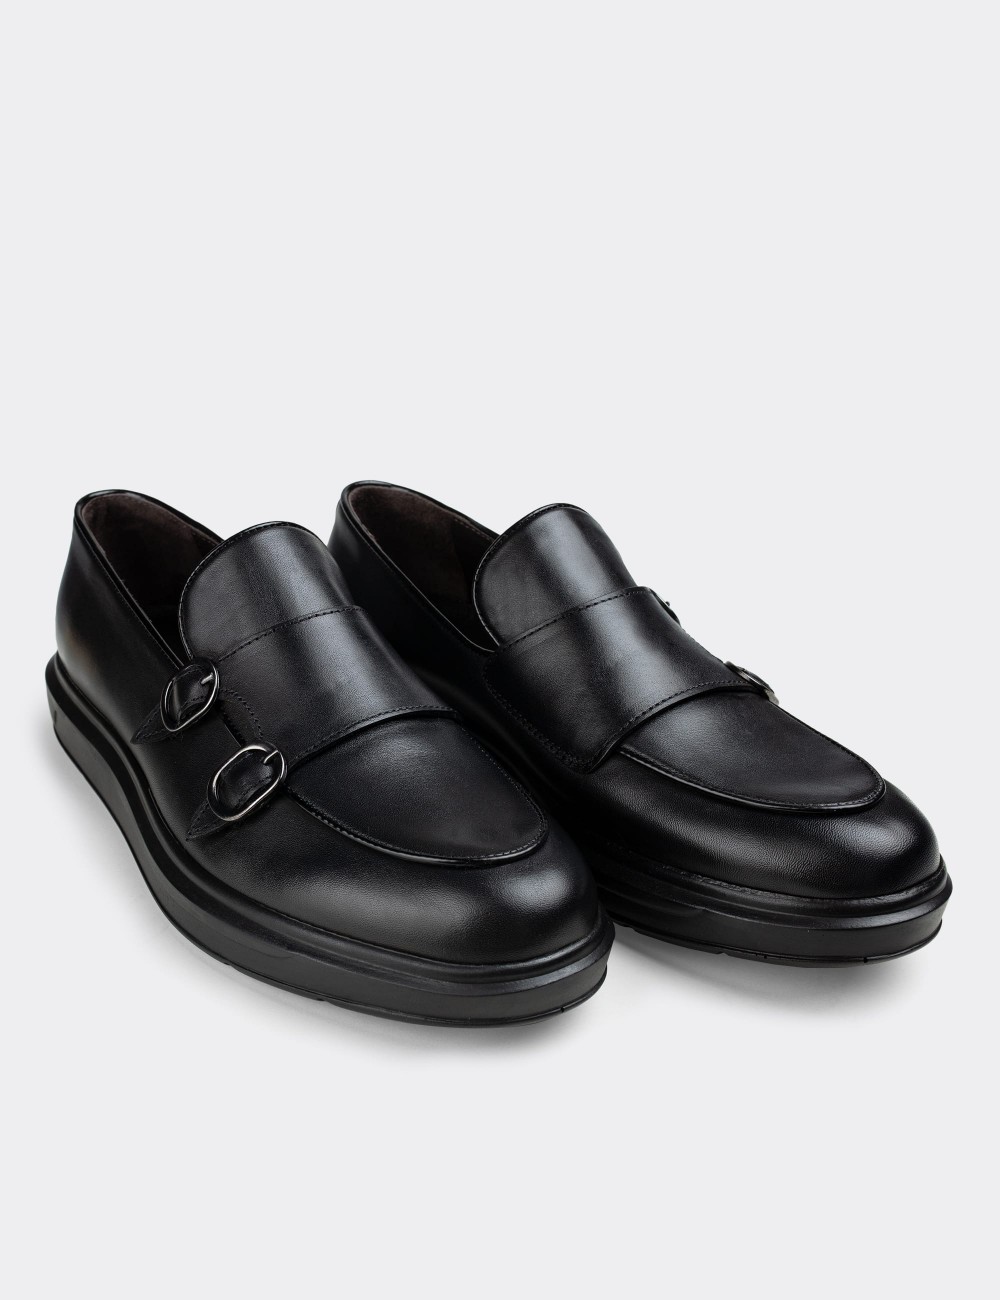 Black  Leather Loafers - 01843MSYHP02